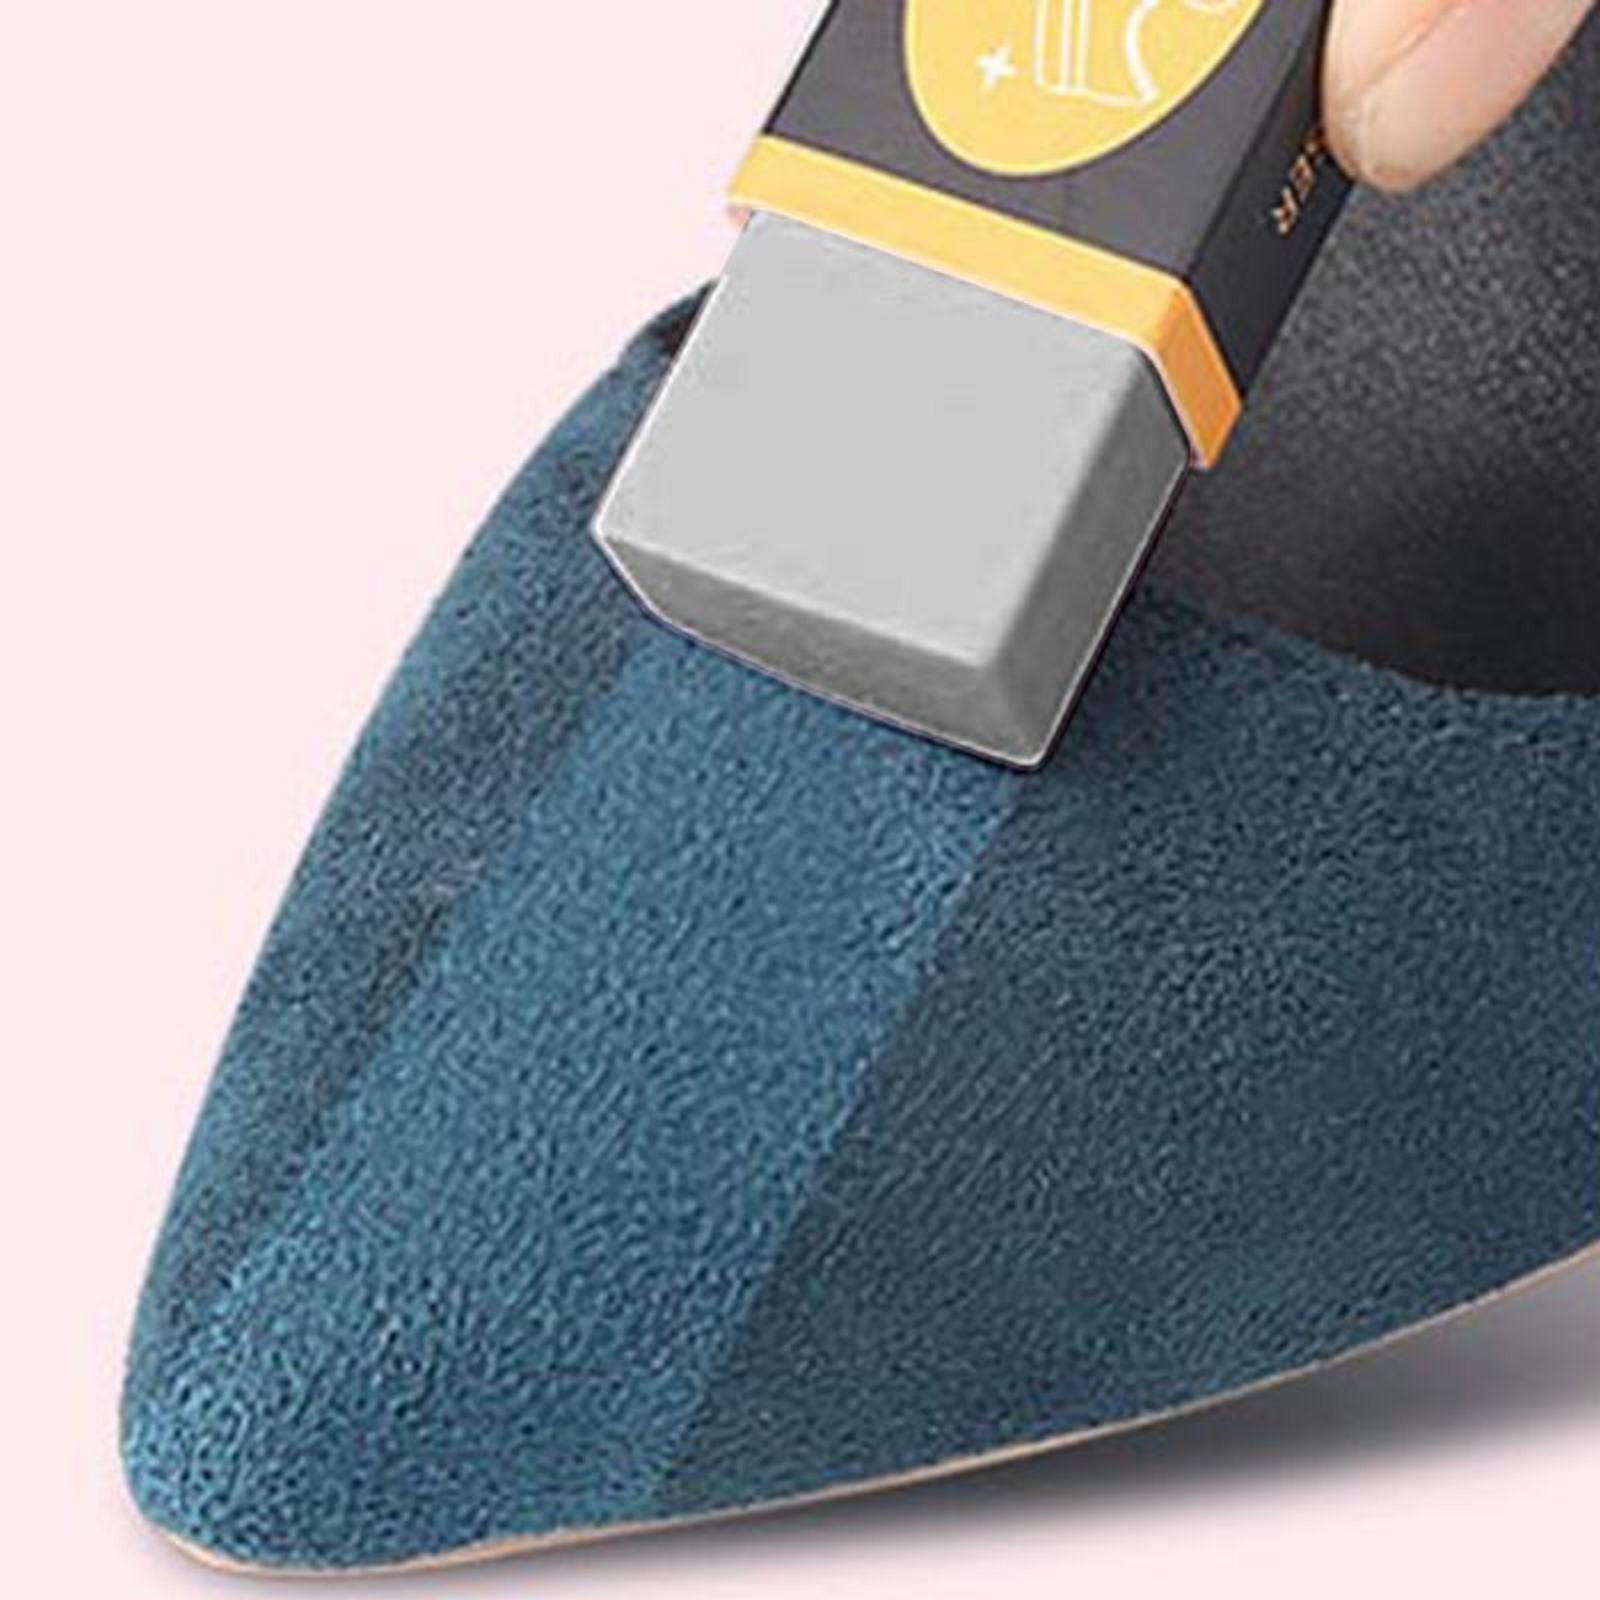 Skpblutn Tool Series Effective Shoes Eraser Sponge Suede Eraser Cleaner  Shoe Cleaner Without Water Dirt From Shoe No Water Needed Easy Carry and  Store. Cleaning Supplies A 